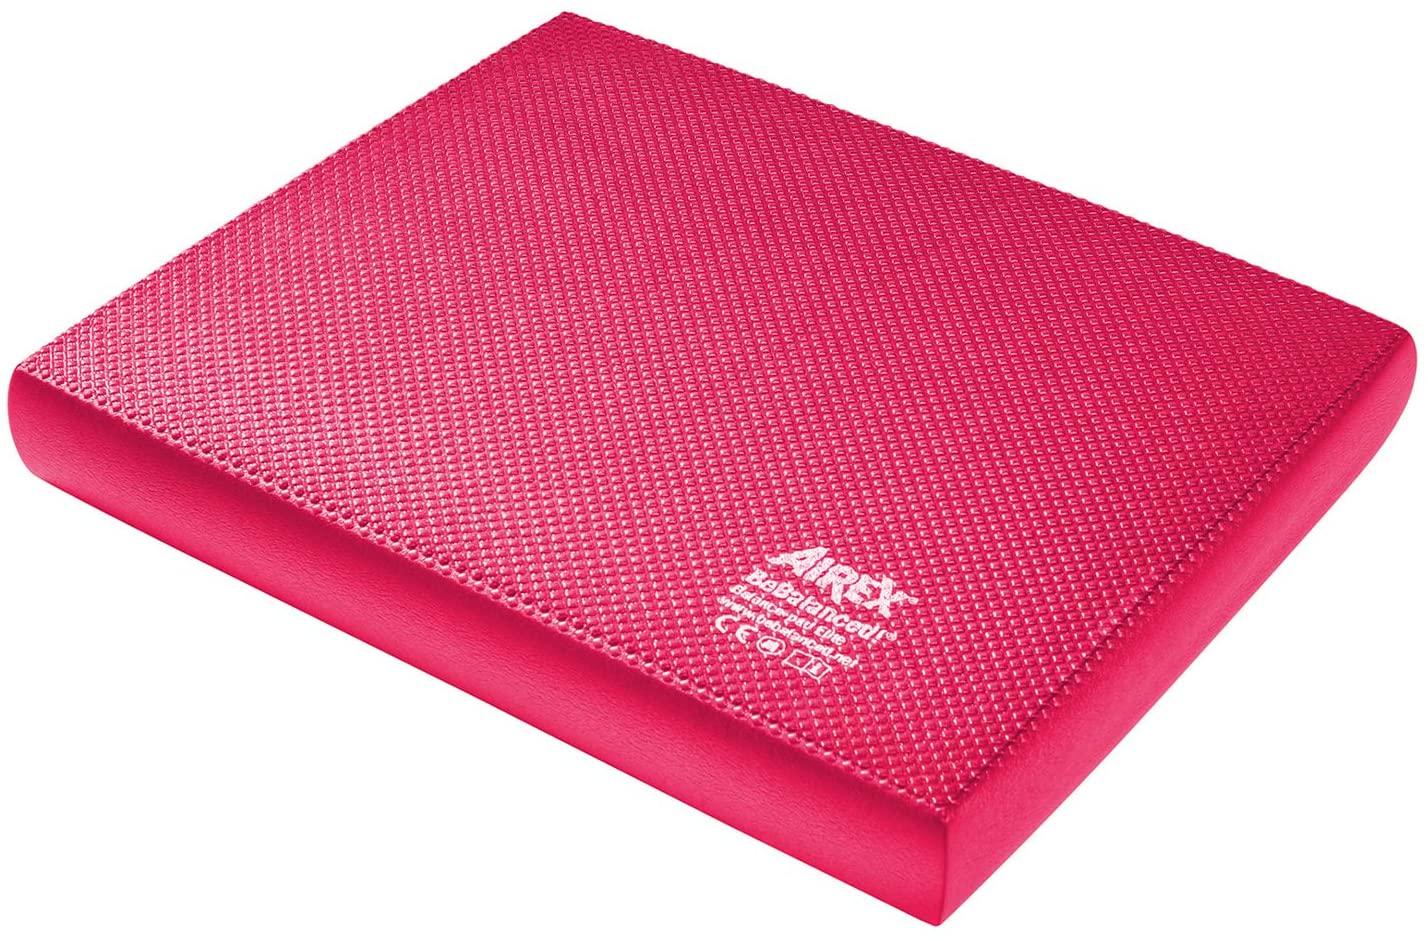 Made from Closed Cell Foam. 19x15x2.3 Therapist’s Choice X-Large Balance Pad 